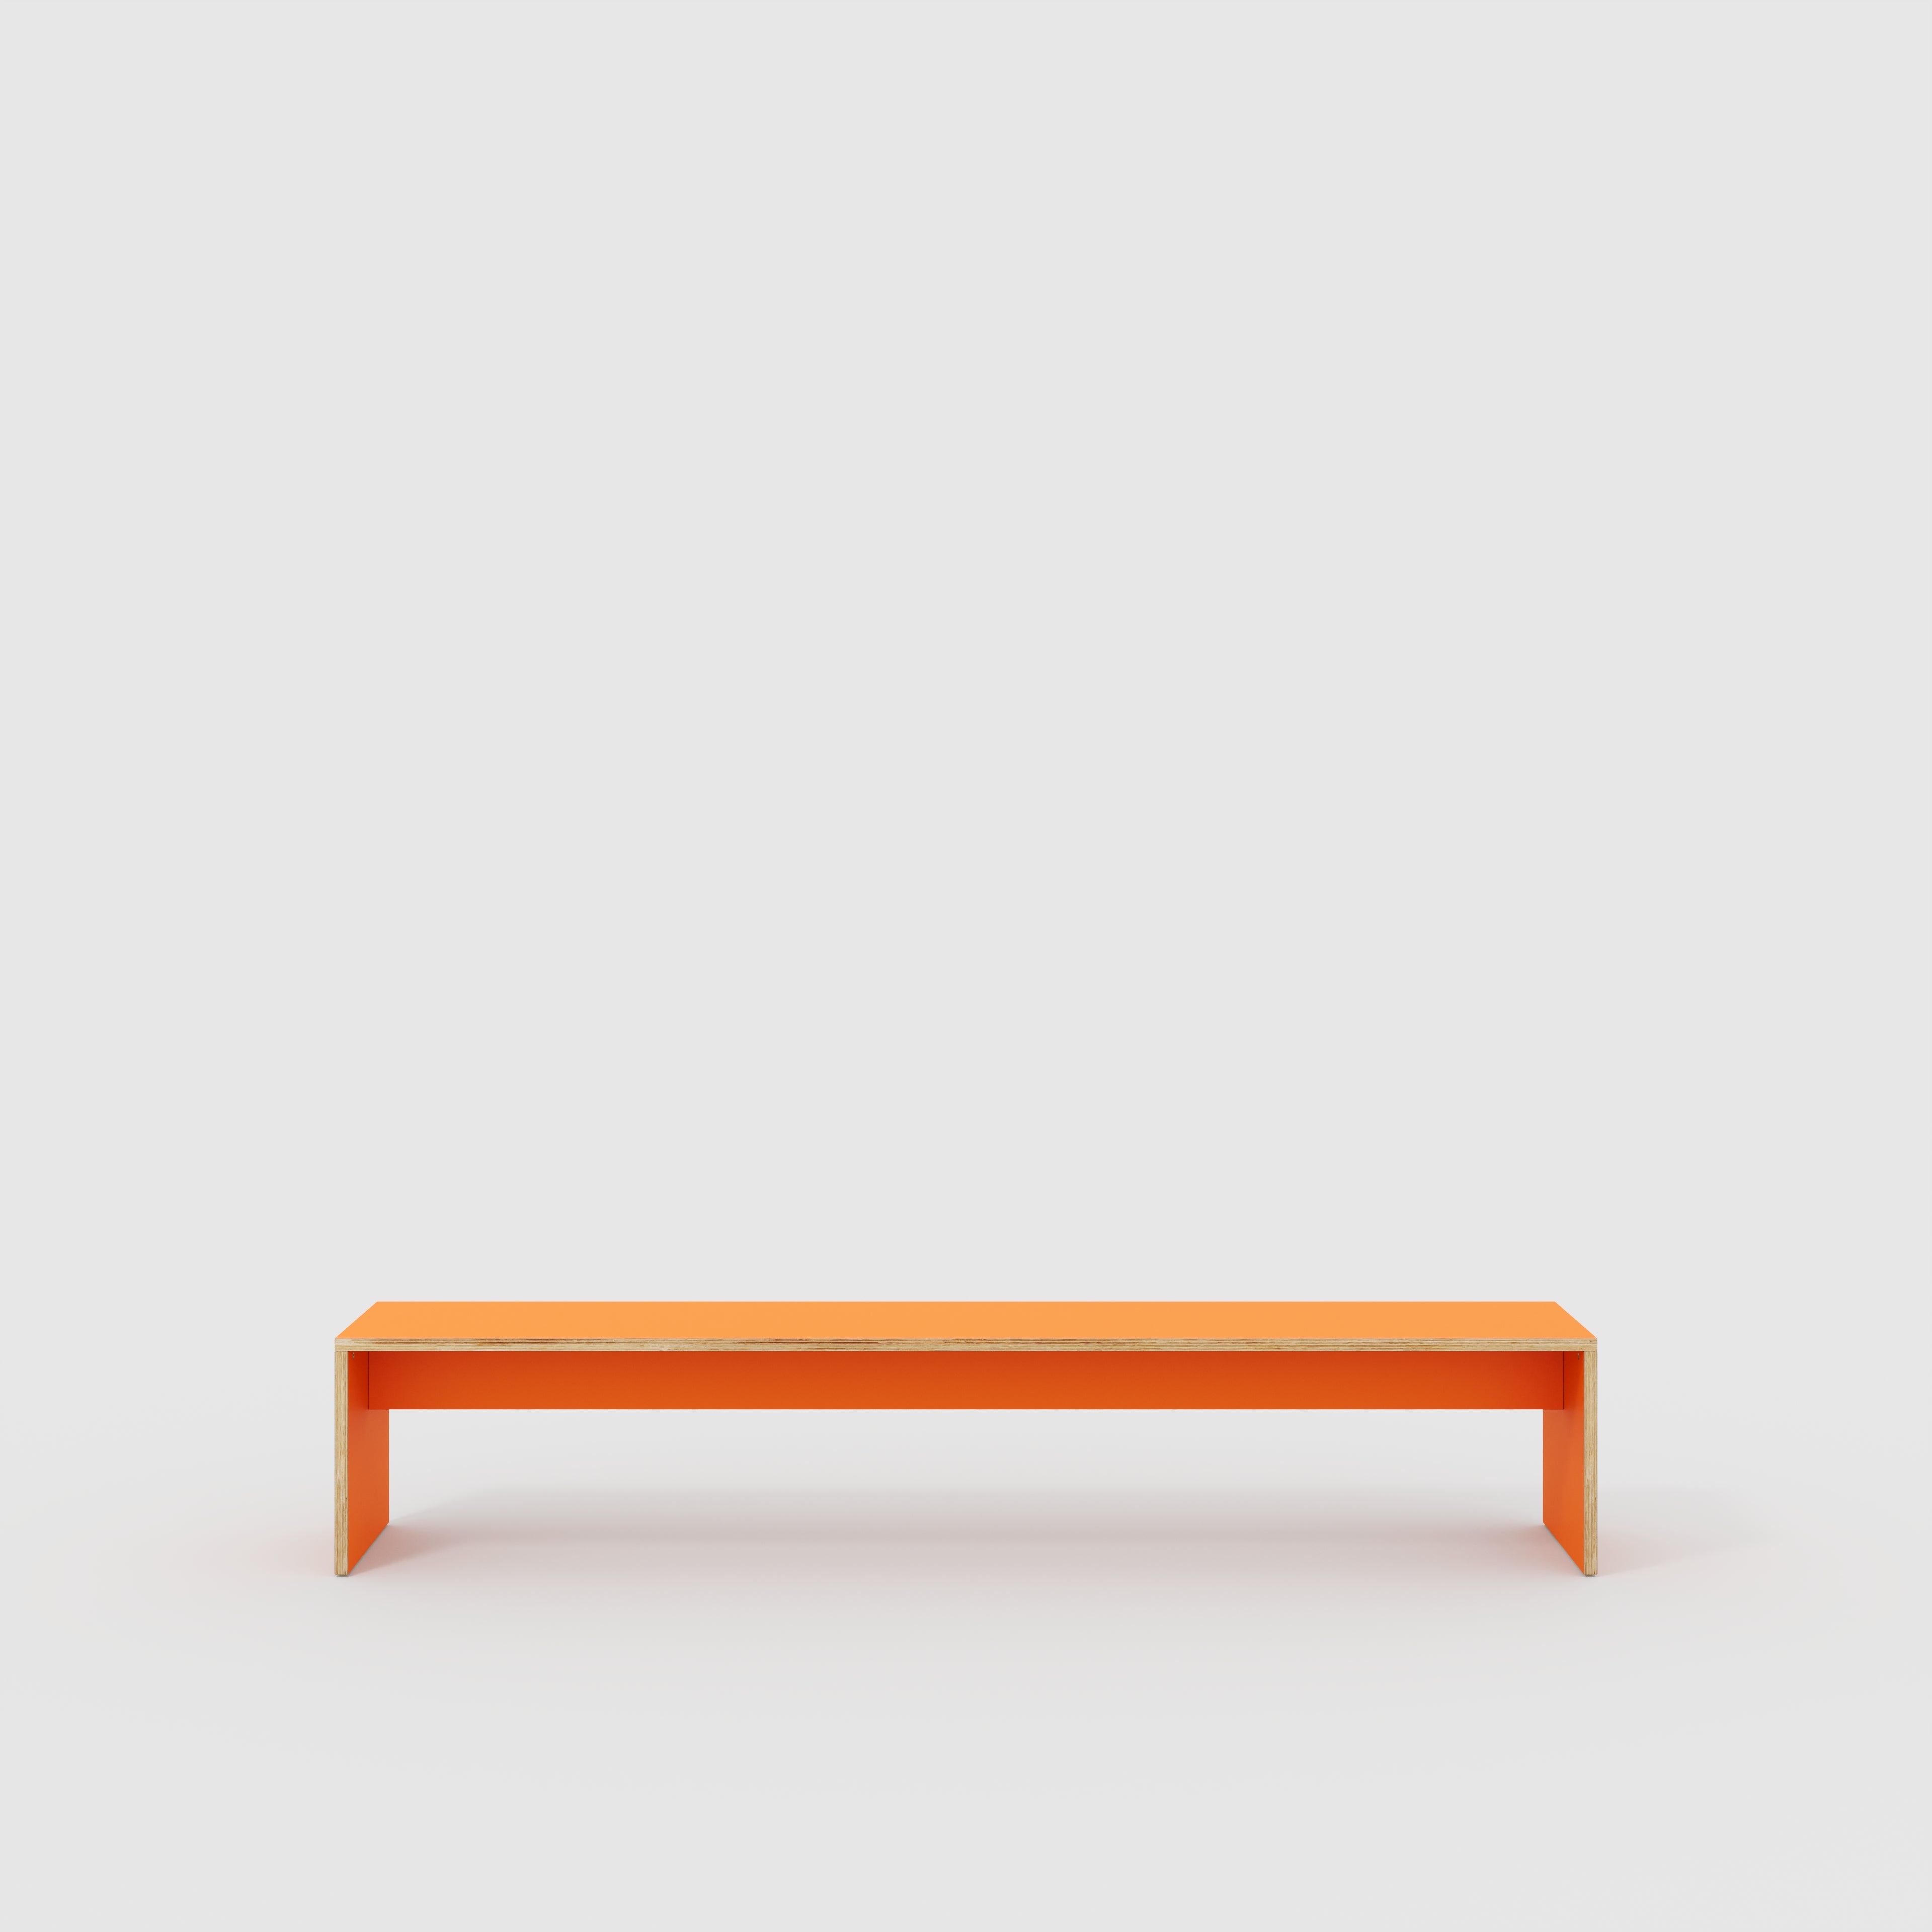 Bench Seat with Solid Sides - Formica Levante Orange - 2400(w) x 400(d)